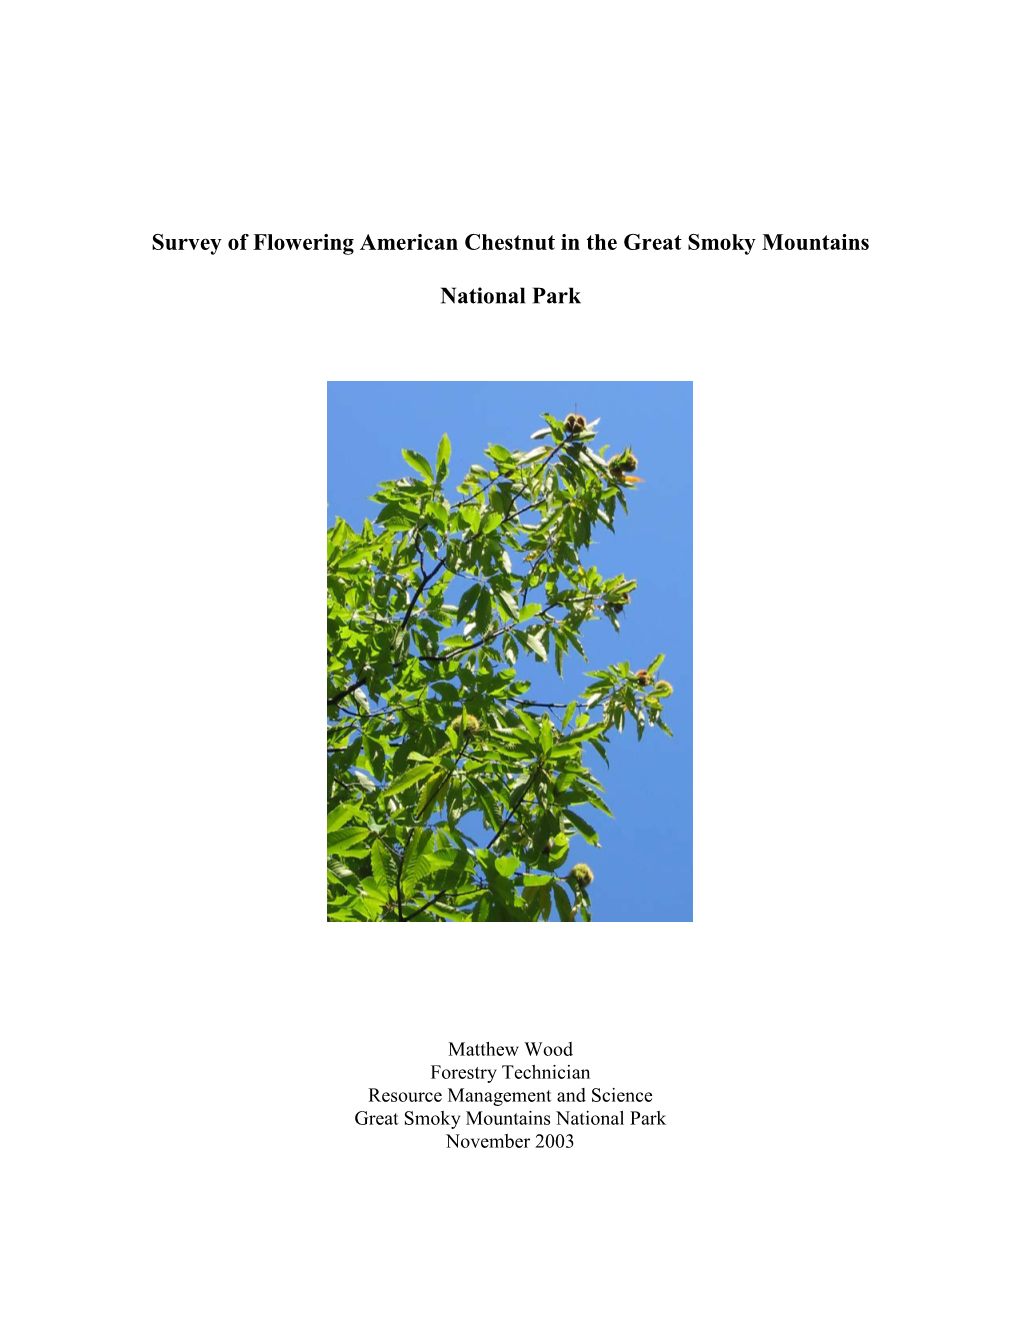 Survey of Flowering American Chestnut in the Great Smoky Mountains National Park